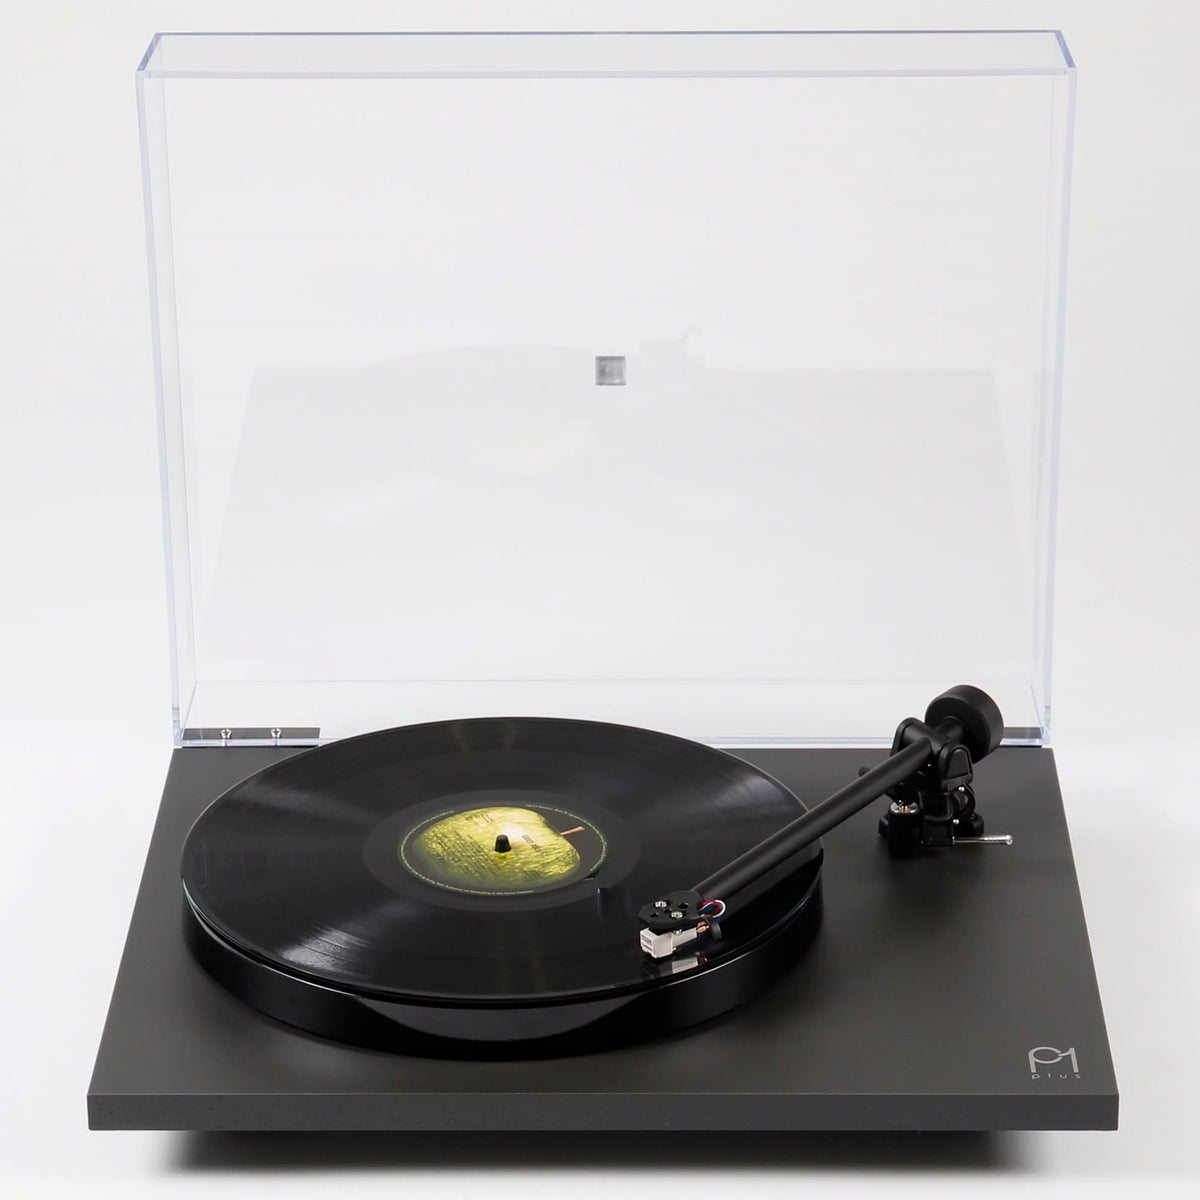 Rega Planar 1 PLUS Turntables with Phono Stage - Black - The Audio Experts